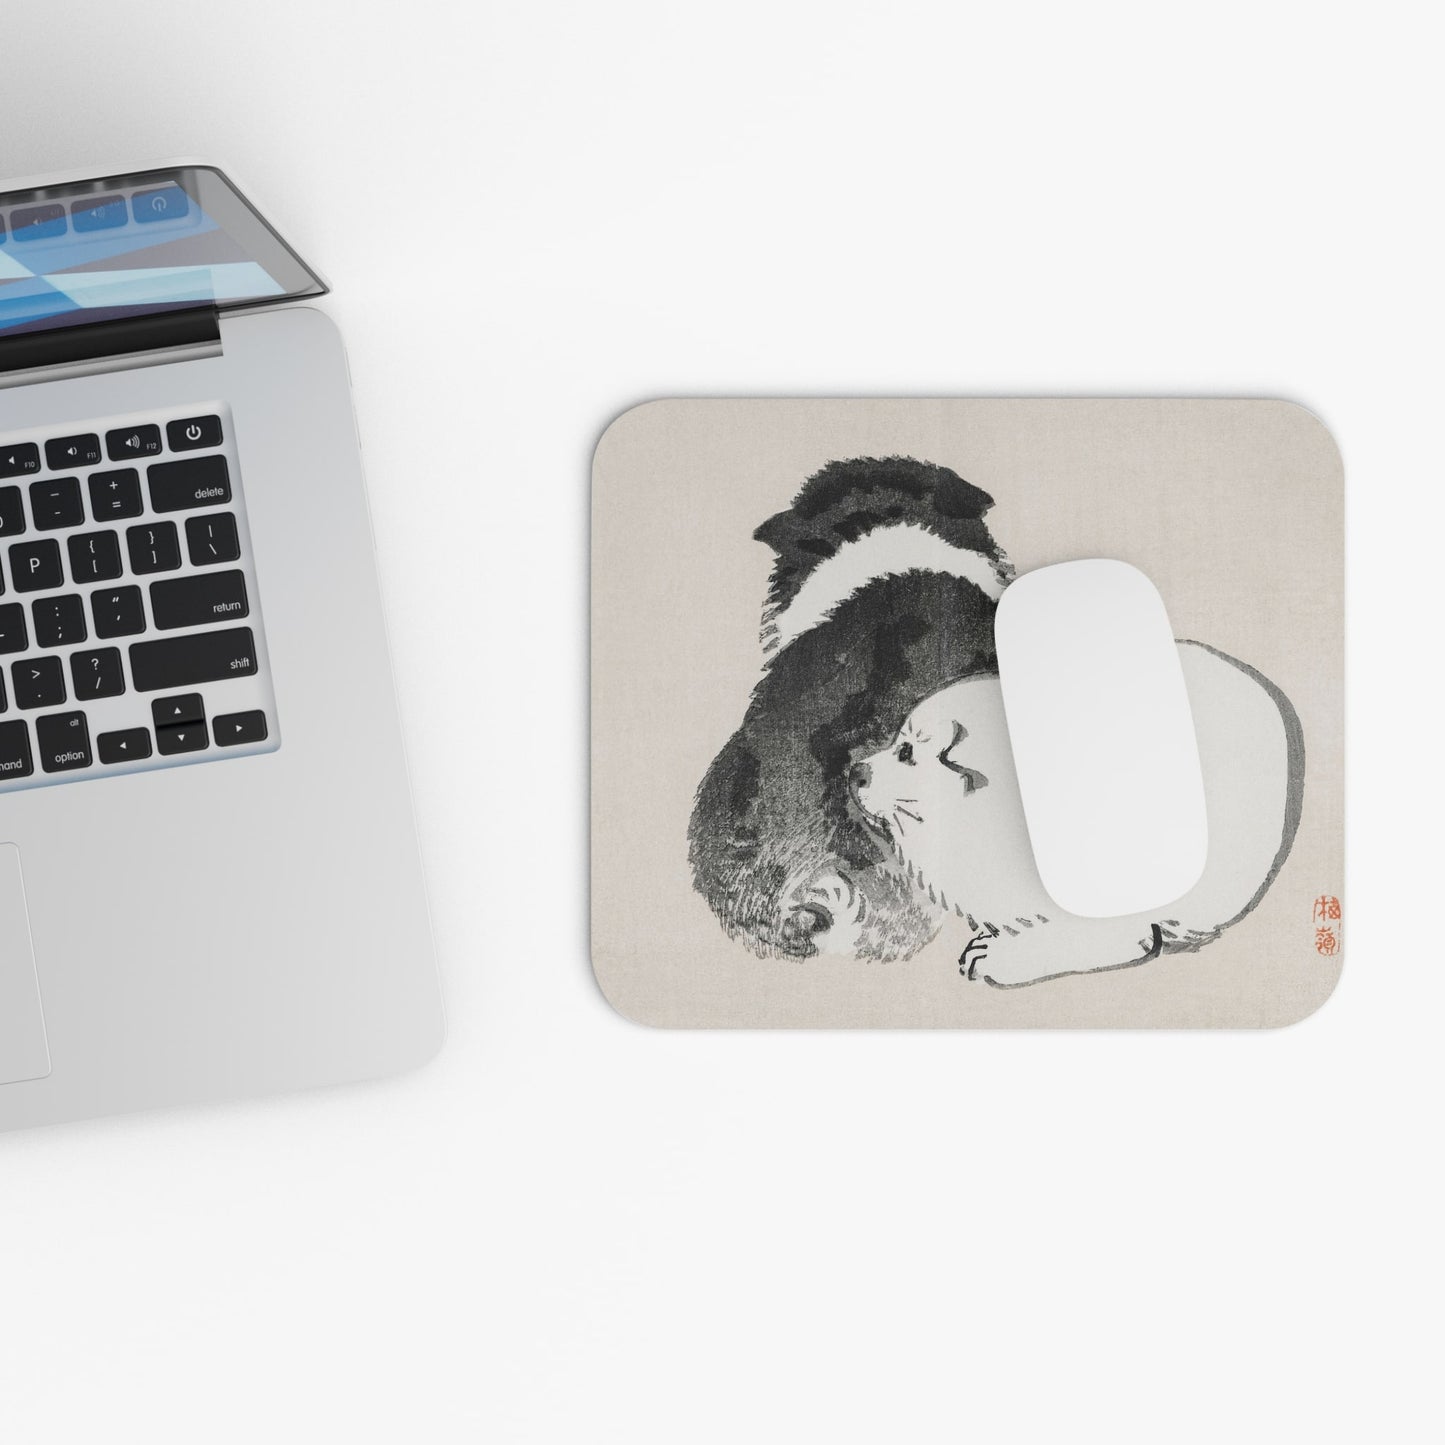 Vintage Cute Baby Animals Design Laptop Mouse Pad with White Mouse